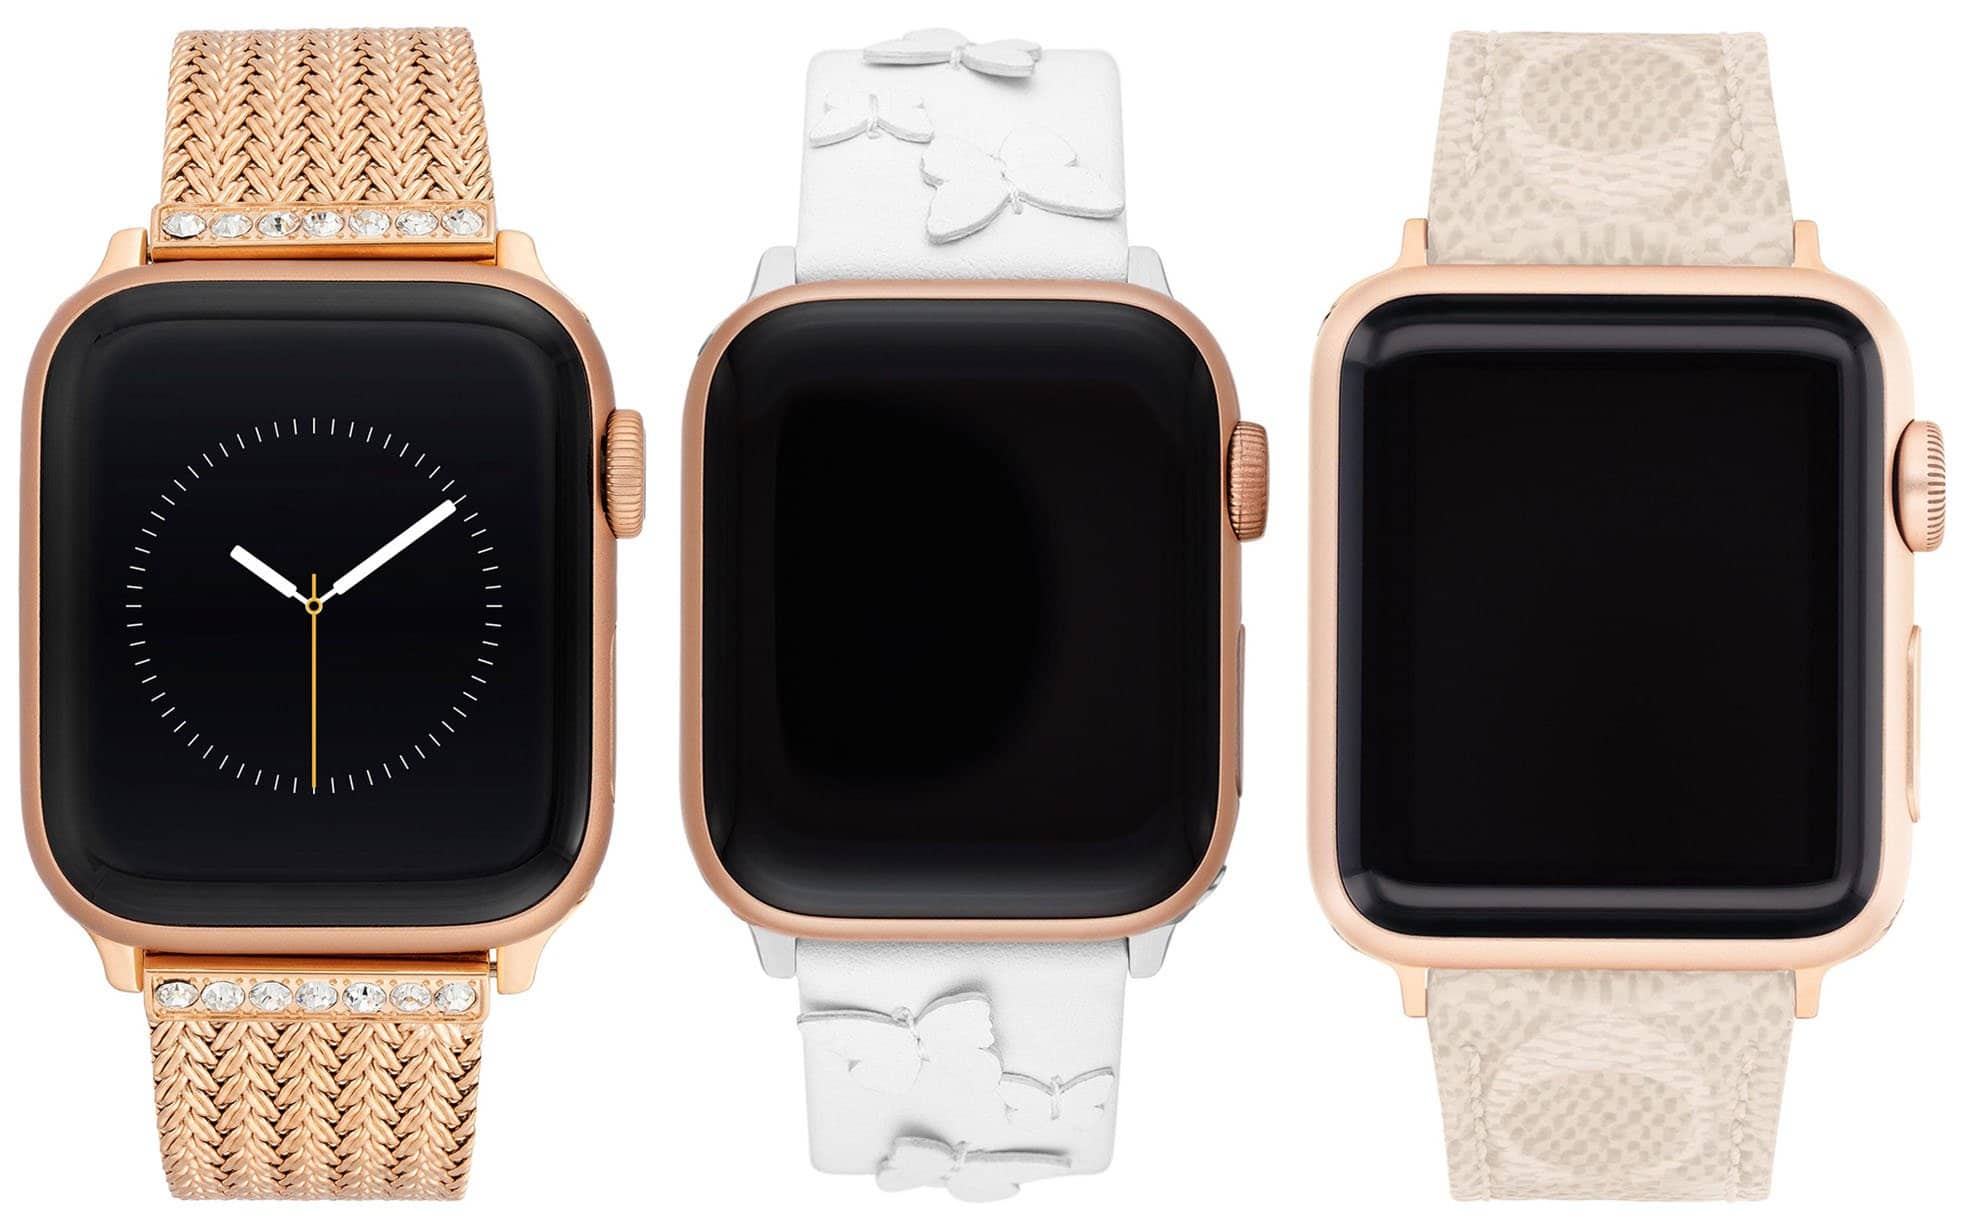 Make your Apple Watch look more feminine with a strap that has a more feminine design